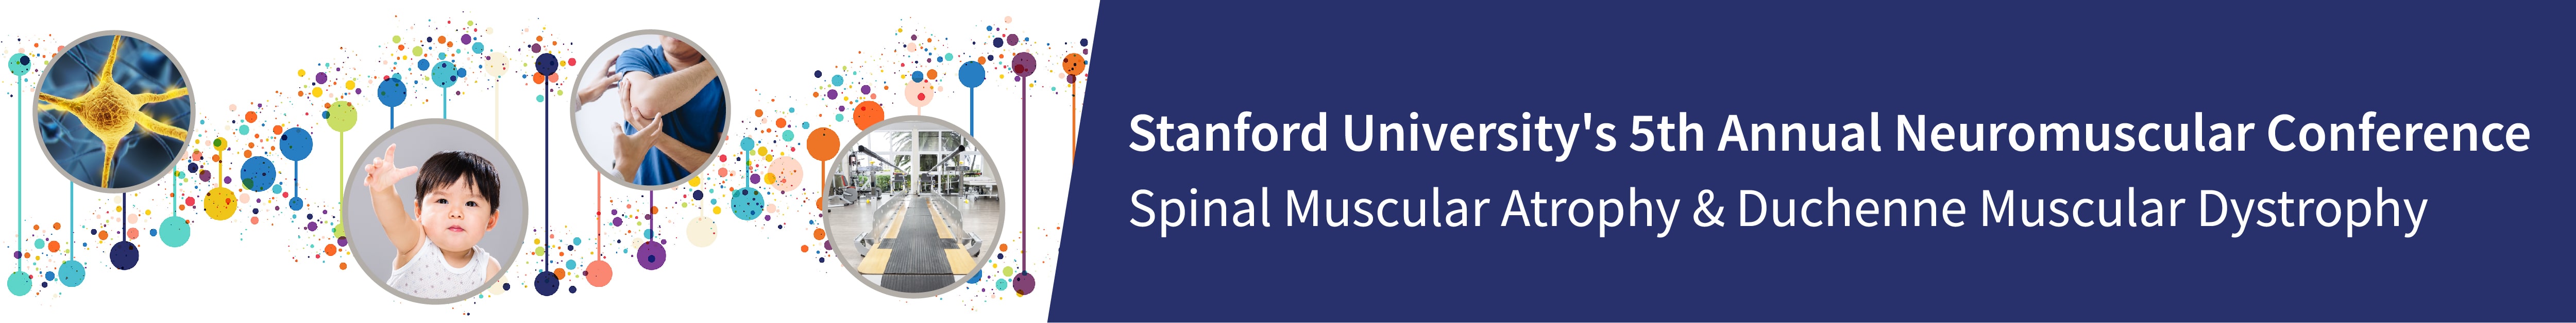 Stanford University's 5th Annual Neuromuscular Conference: Spinal Muscular Atrophy & Duchenne Muscular Dystrophy - Lessons Learned in Genetic Treatments Banner